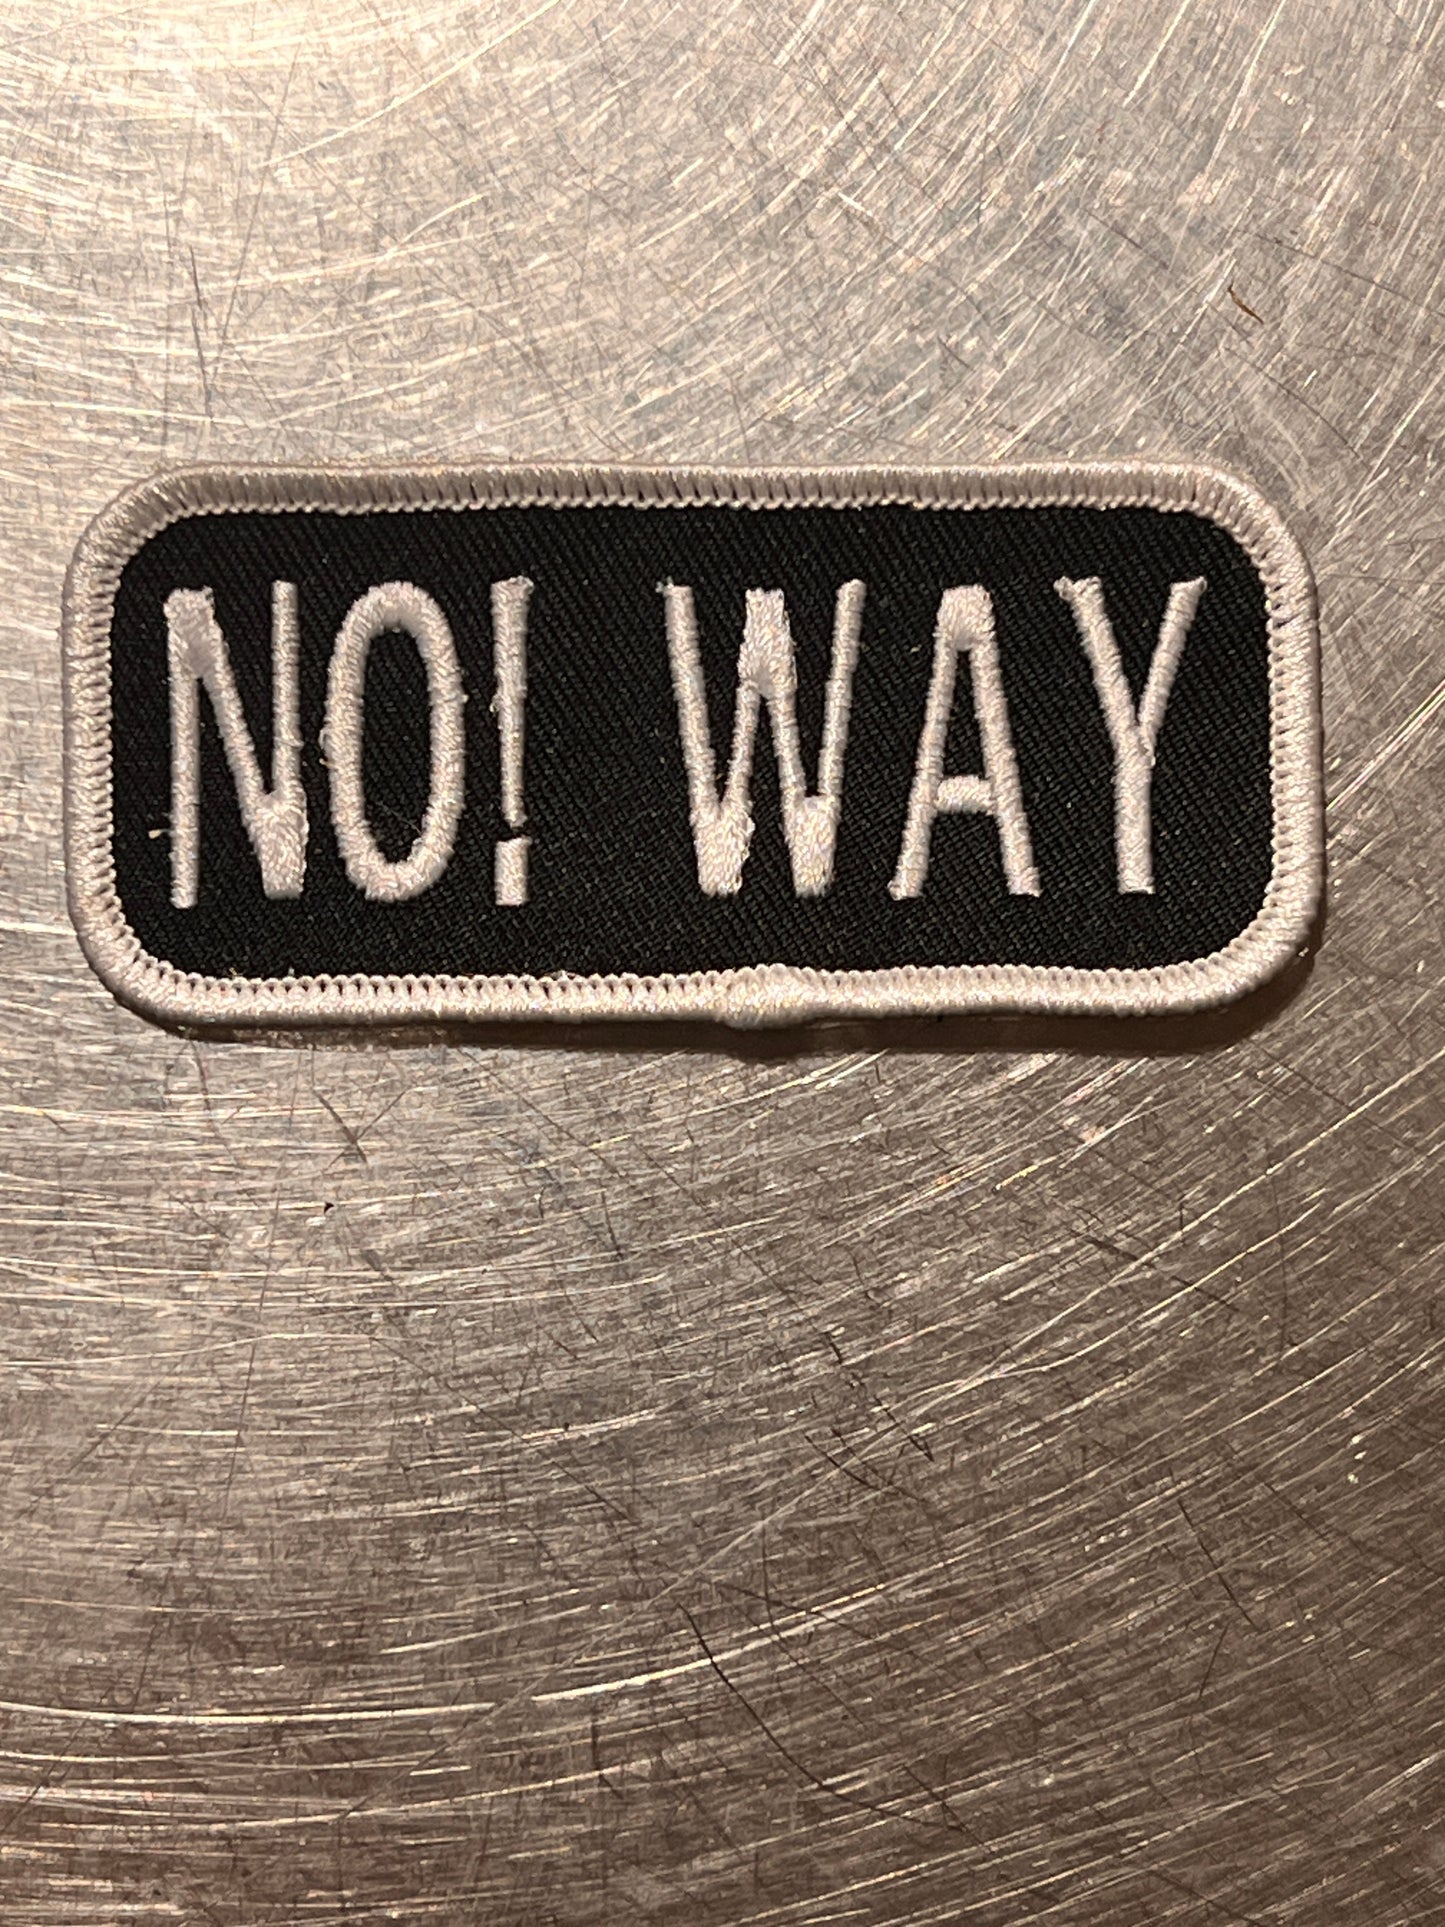 ‘NO! WAY’ embroidered patch